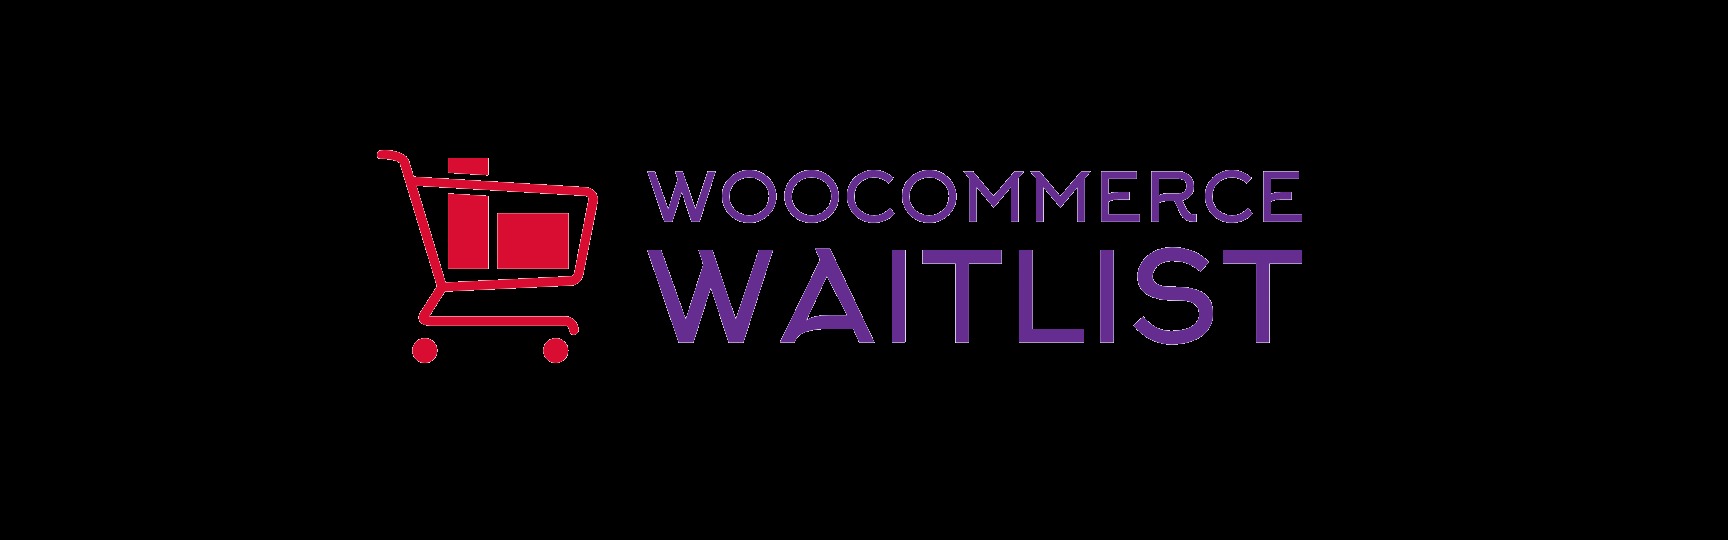 WooCommerce Waitlist - WooCommerce Waitlist v2.4.9 by Woocommerce Nulled Free Download